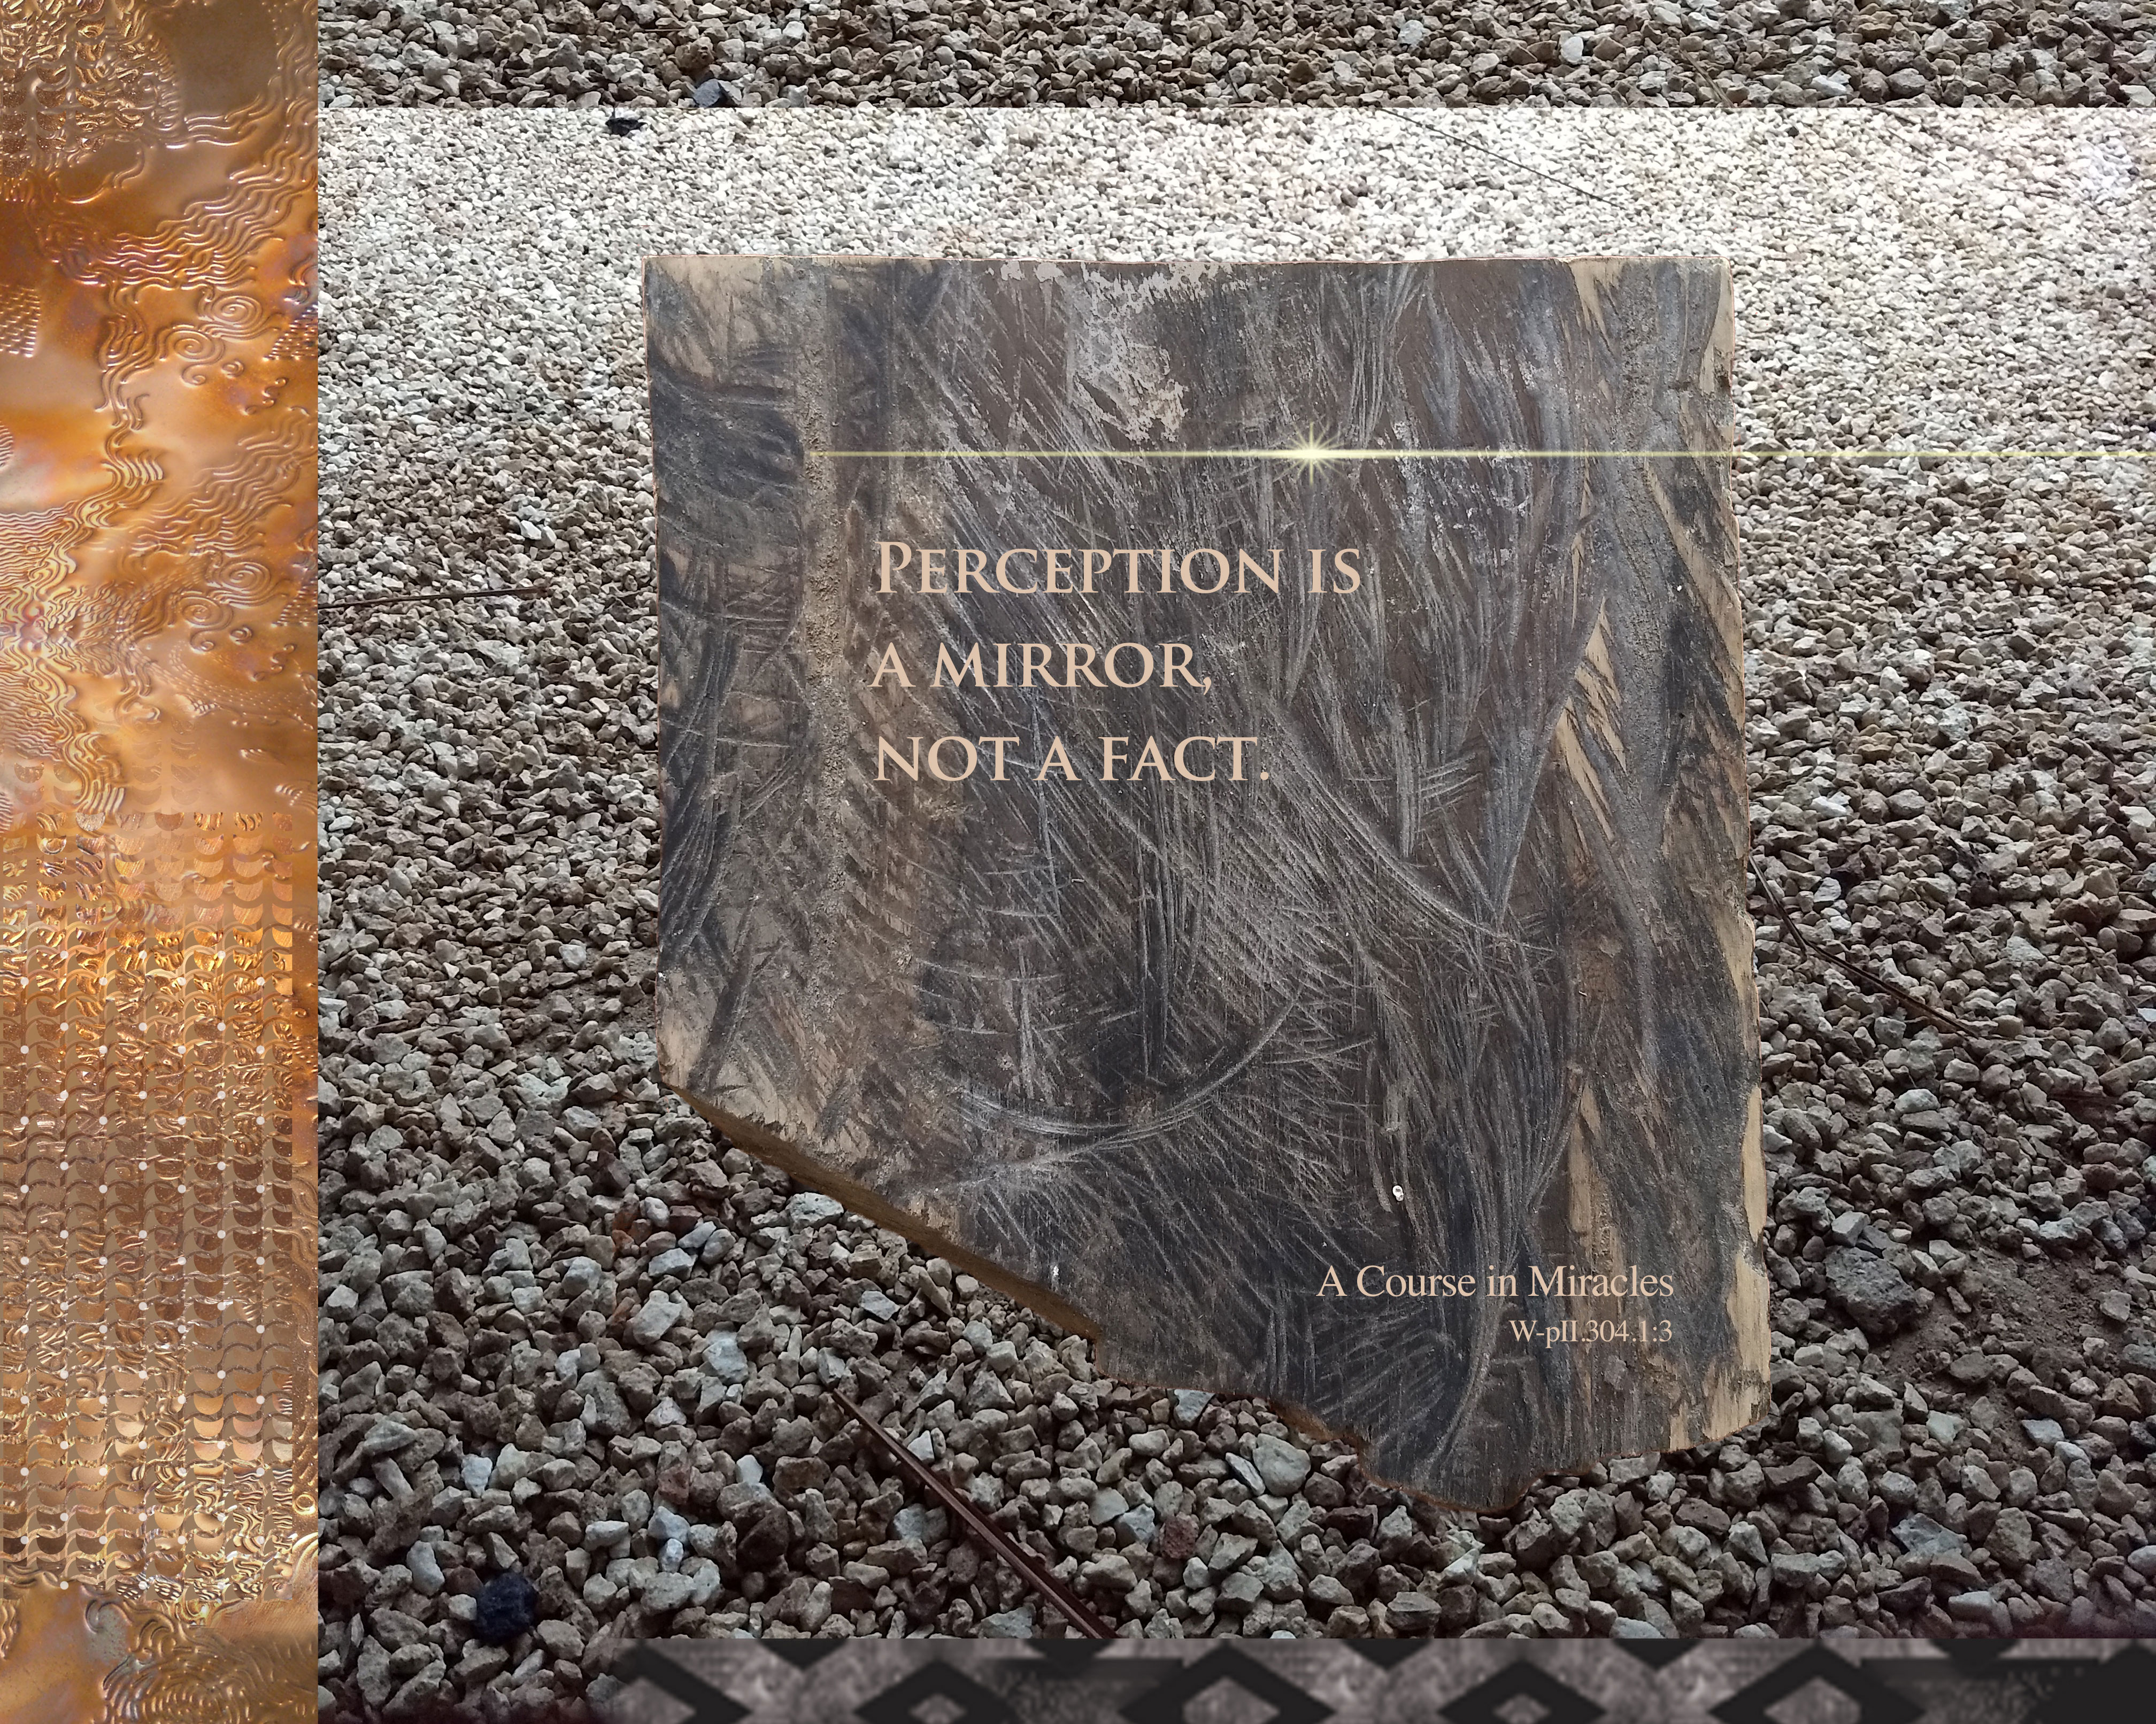 Meditation graphic with quote: "Perception is a mirror, not a fact." – W-pII.304.1:3 – scratched slate-looking wood with horizontal starburst